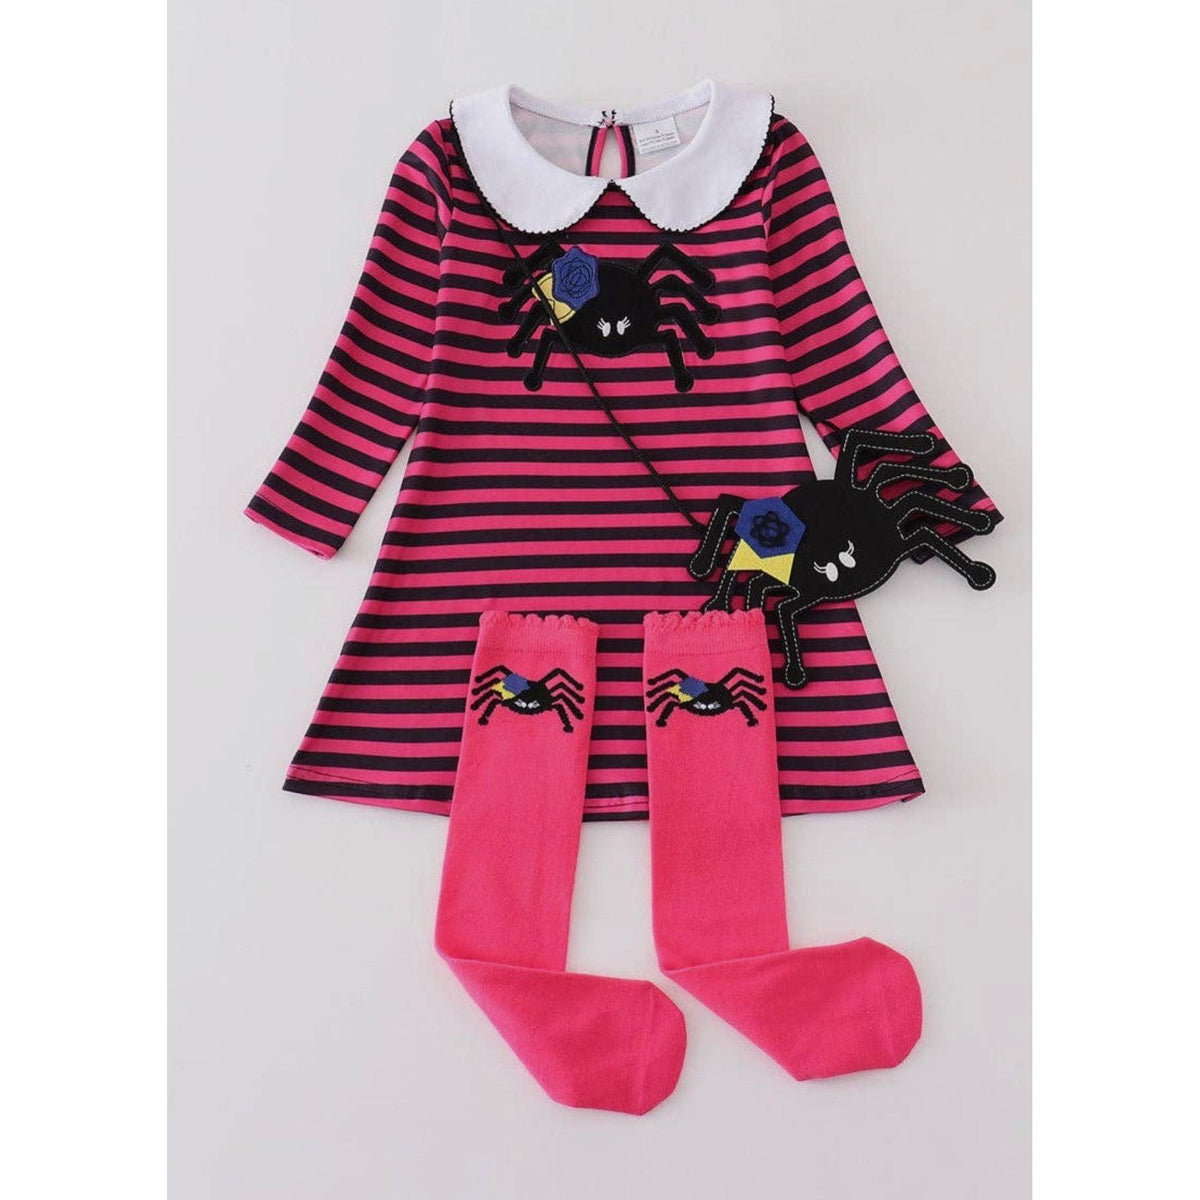 Girl's Striped Spider Dress with Matching Pouch and Socks in Pink | Halloween Dress - becauseofadi